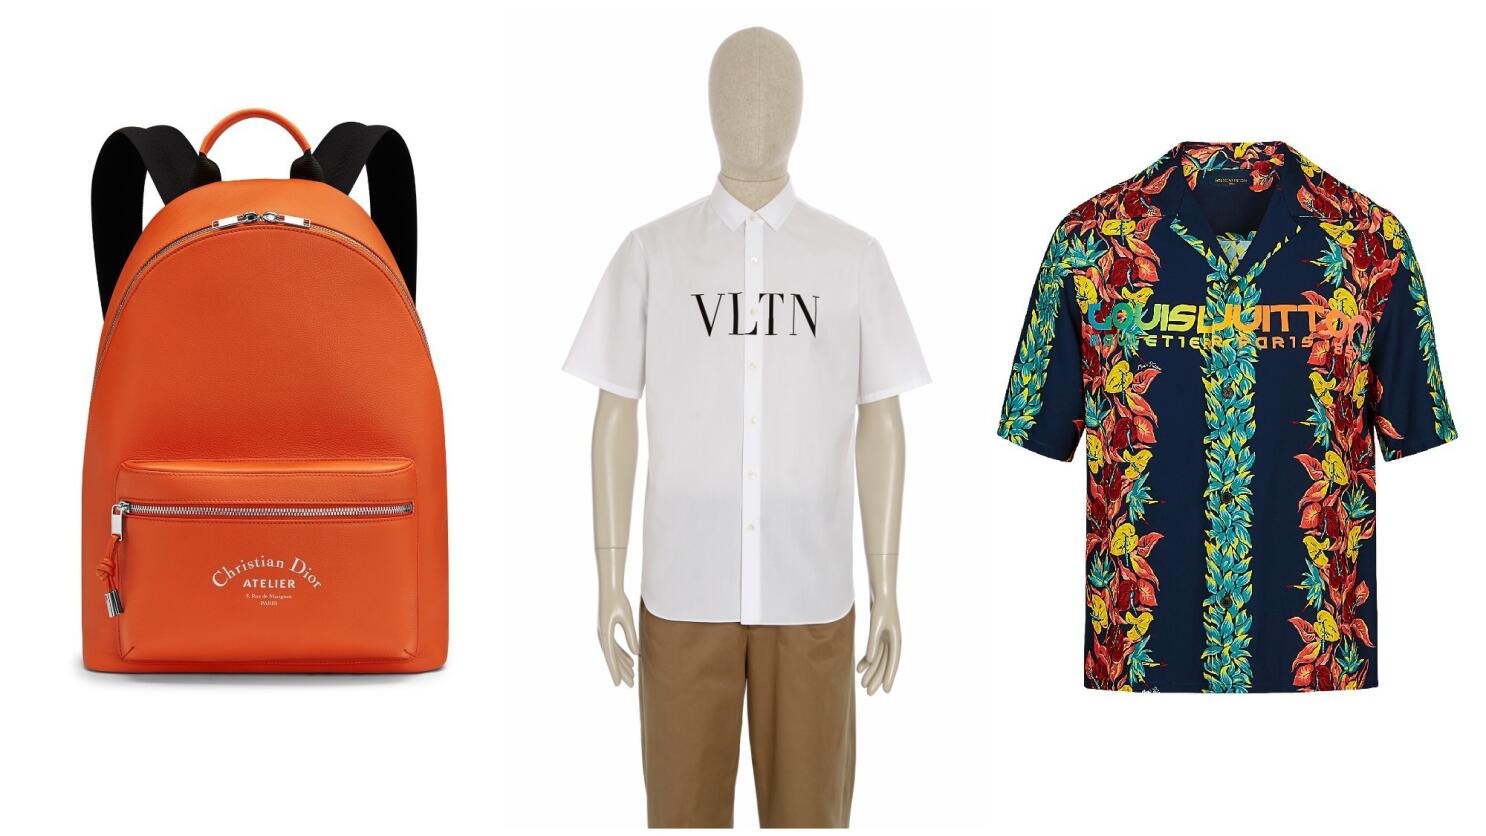 Louis Vuitton made a football jersey that pays homage to a classic